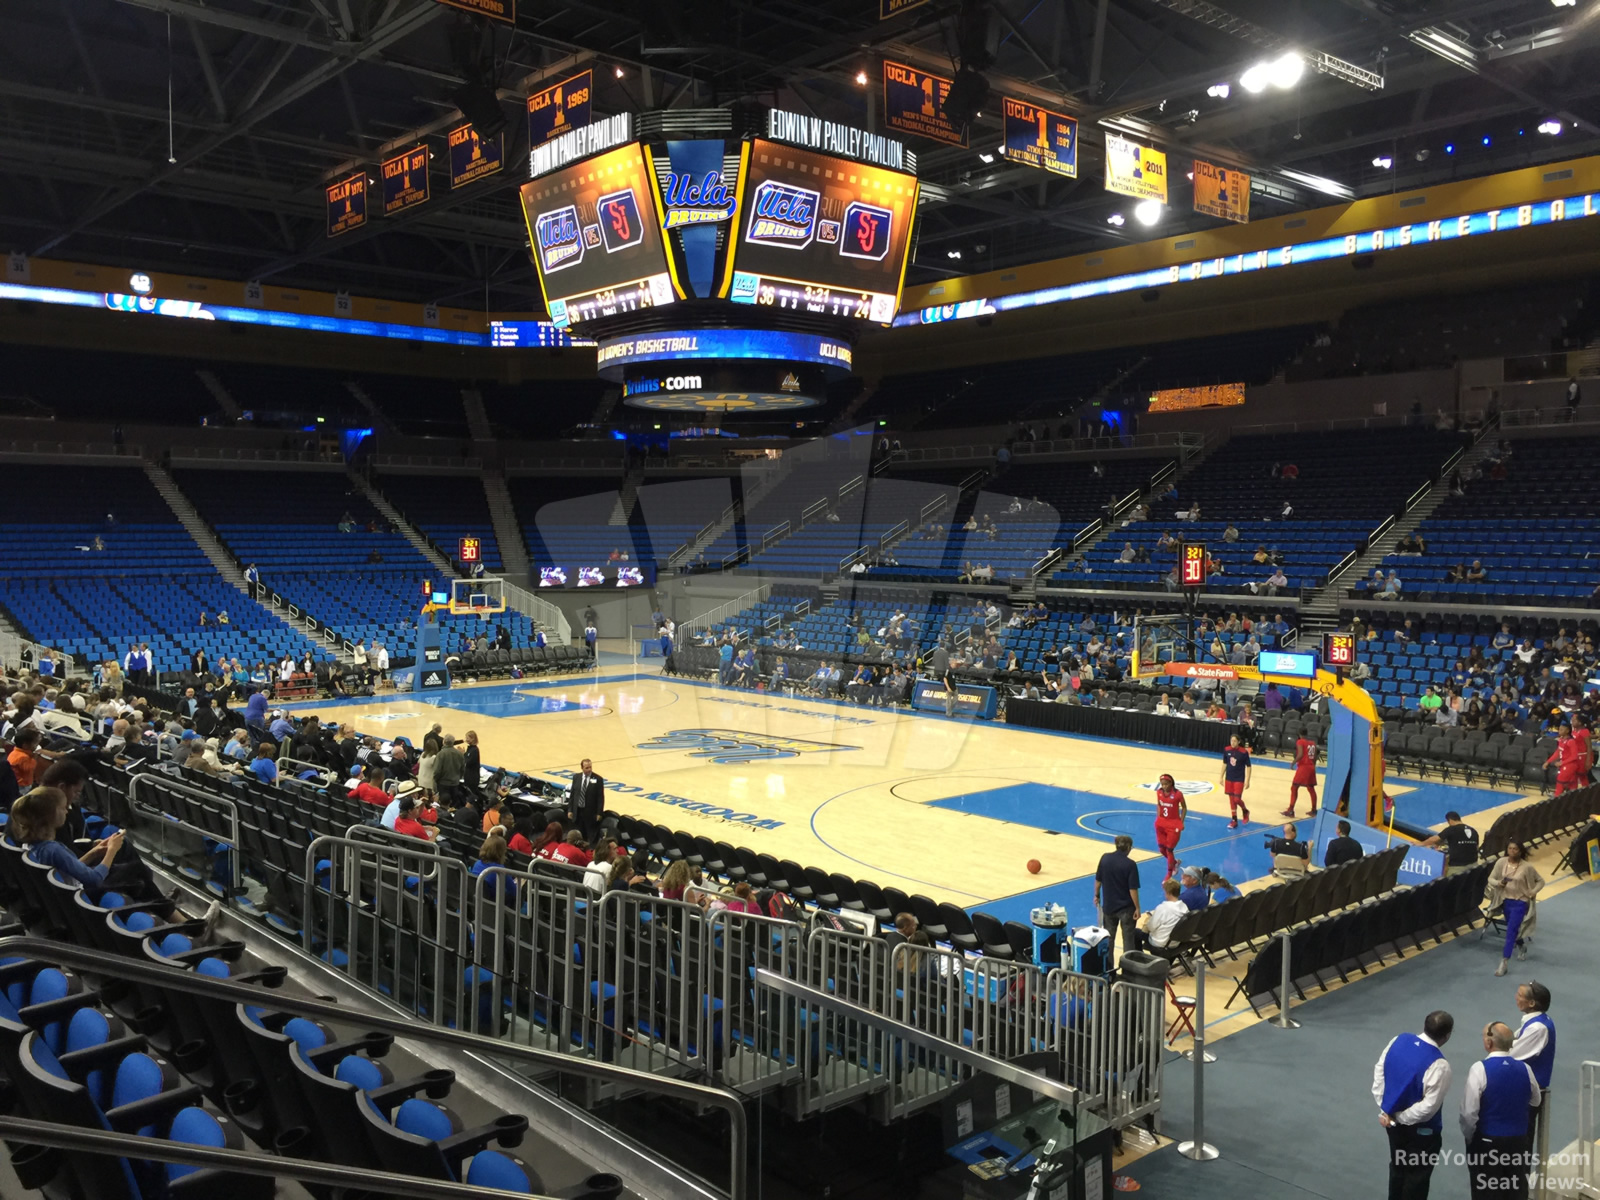 section 125, row 3 seat view  - pauley pavilion